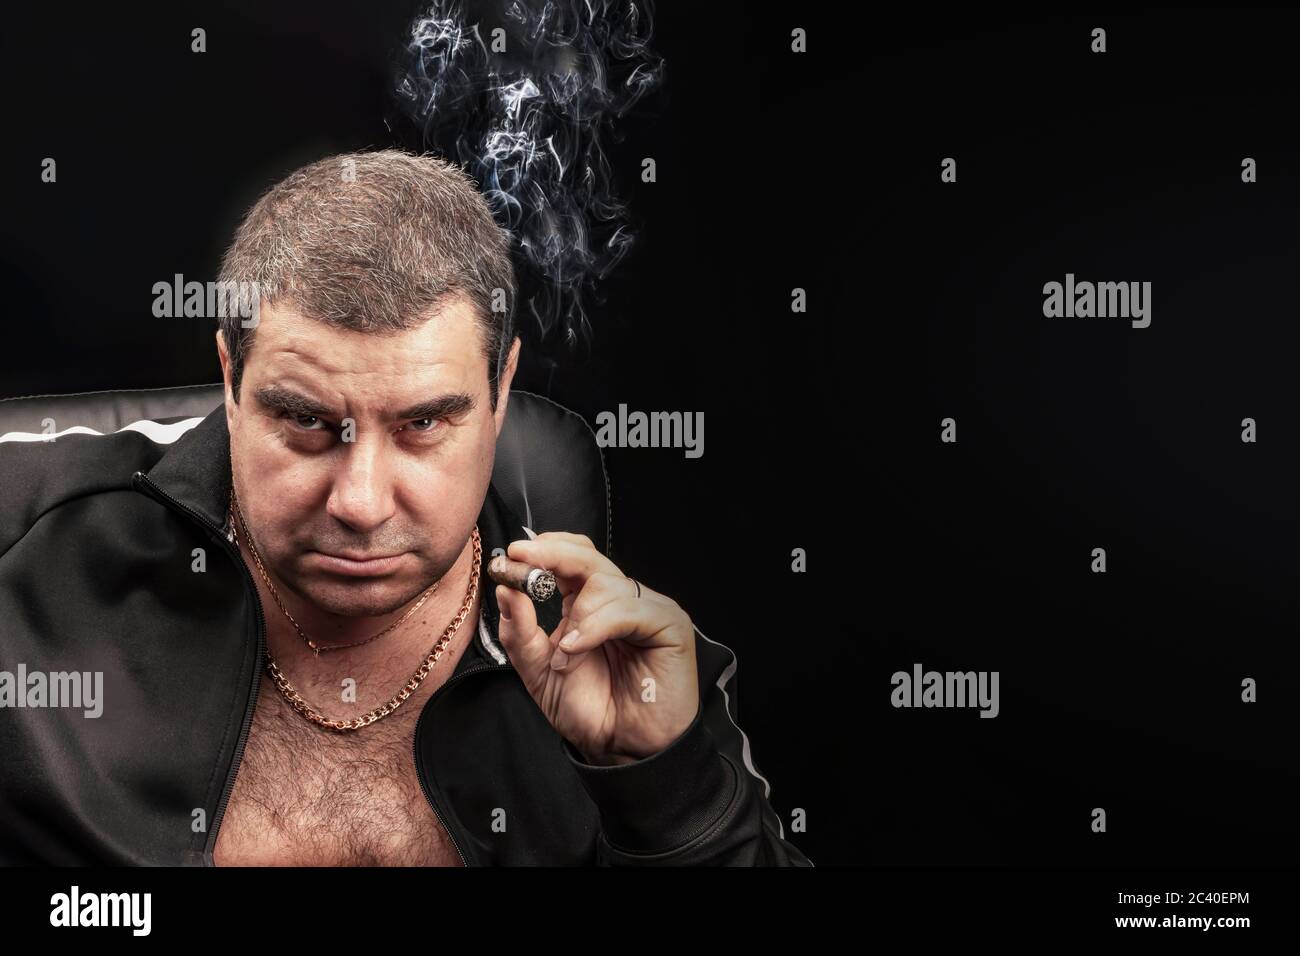 a stern adult man Smoking a cigar looks confidently at the camera. copy space on a black background. a crime boss, a mobster serving time in prison. Stock Photo